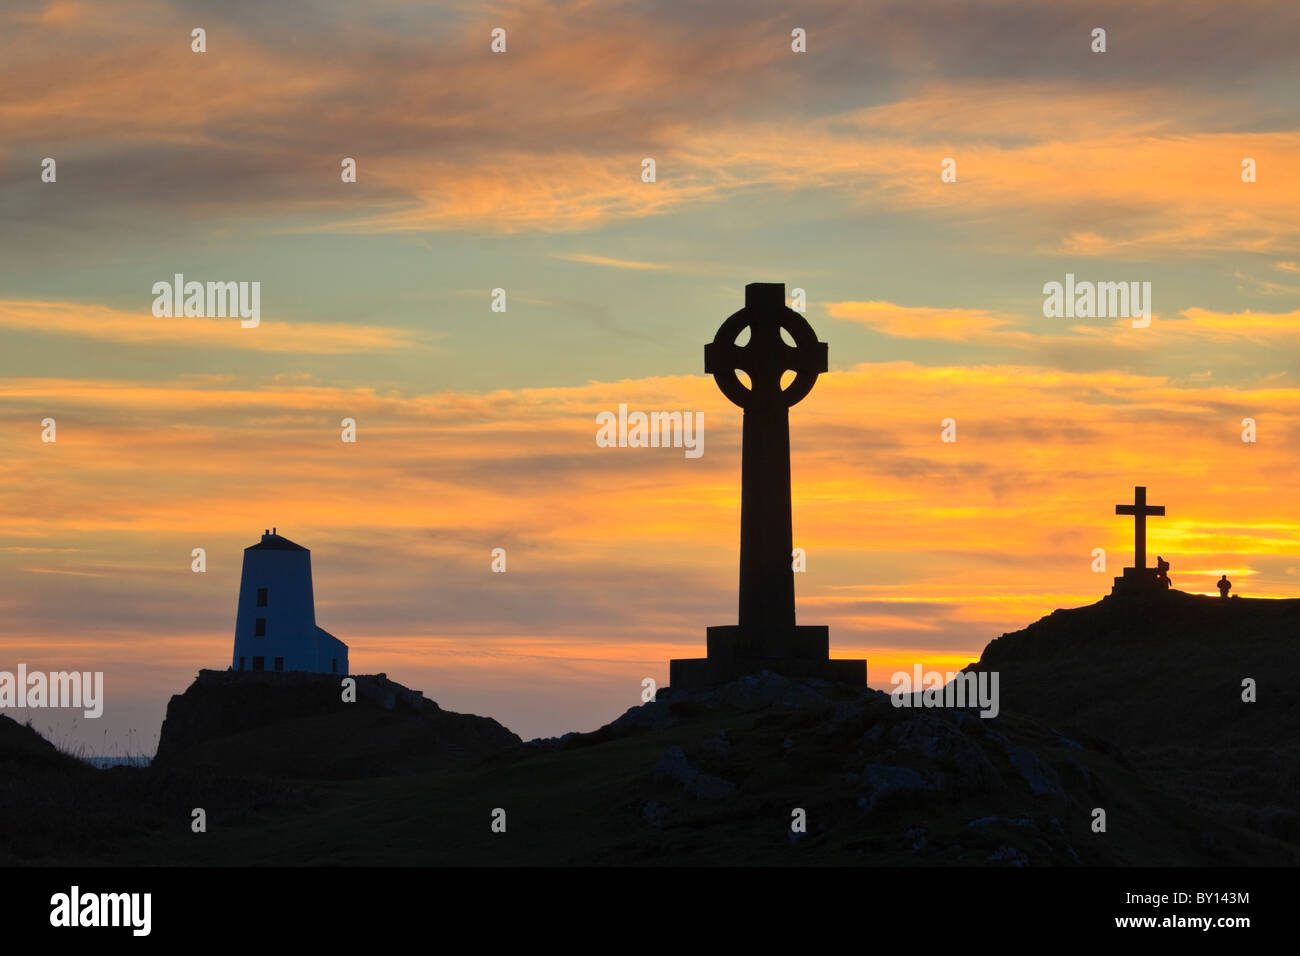 St Dwynwen Celtic cross and Twr Mawr lighthouse in silhouette on Llanddwyn Island at sunset Isle of Anglesey, North Wales, UK Stock Photo